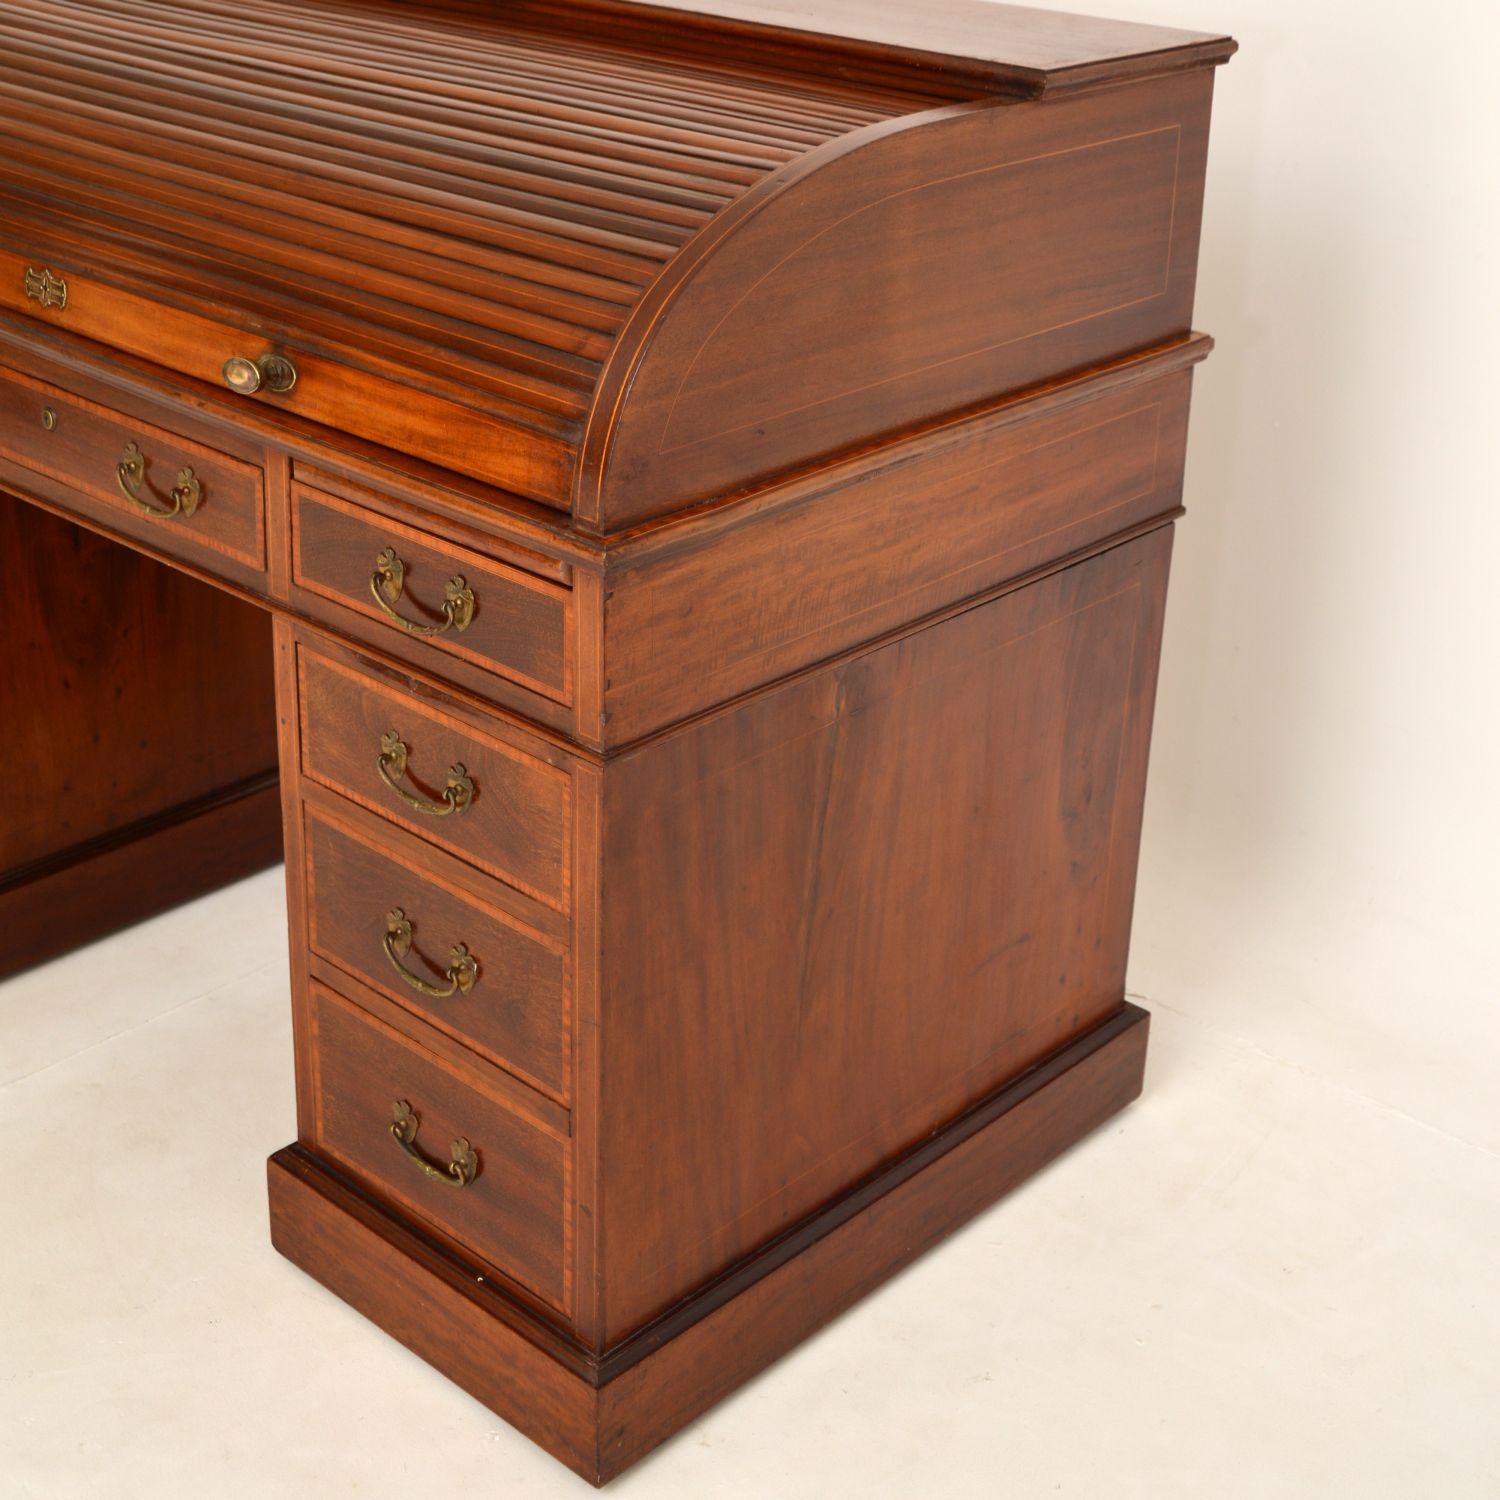 English Antique Roll Top Pedestal Desk by Waring & Gillows